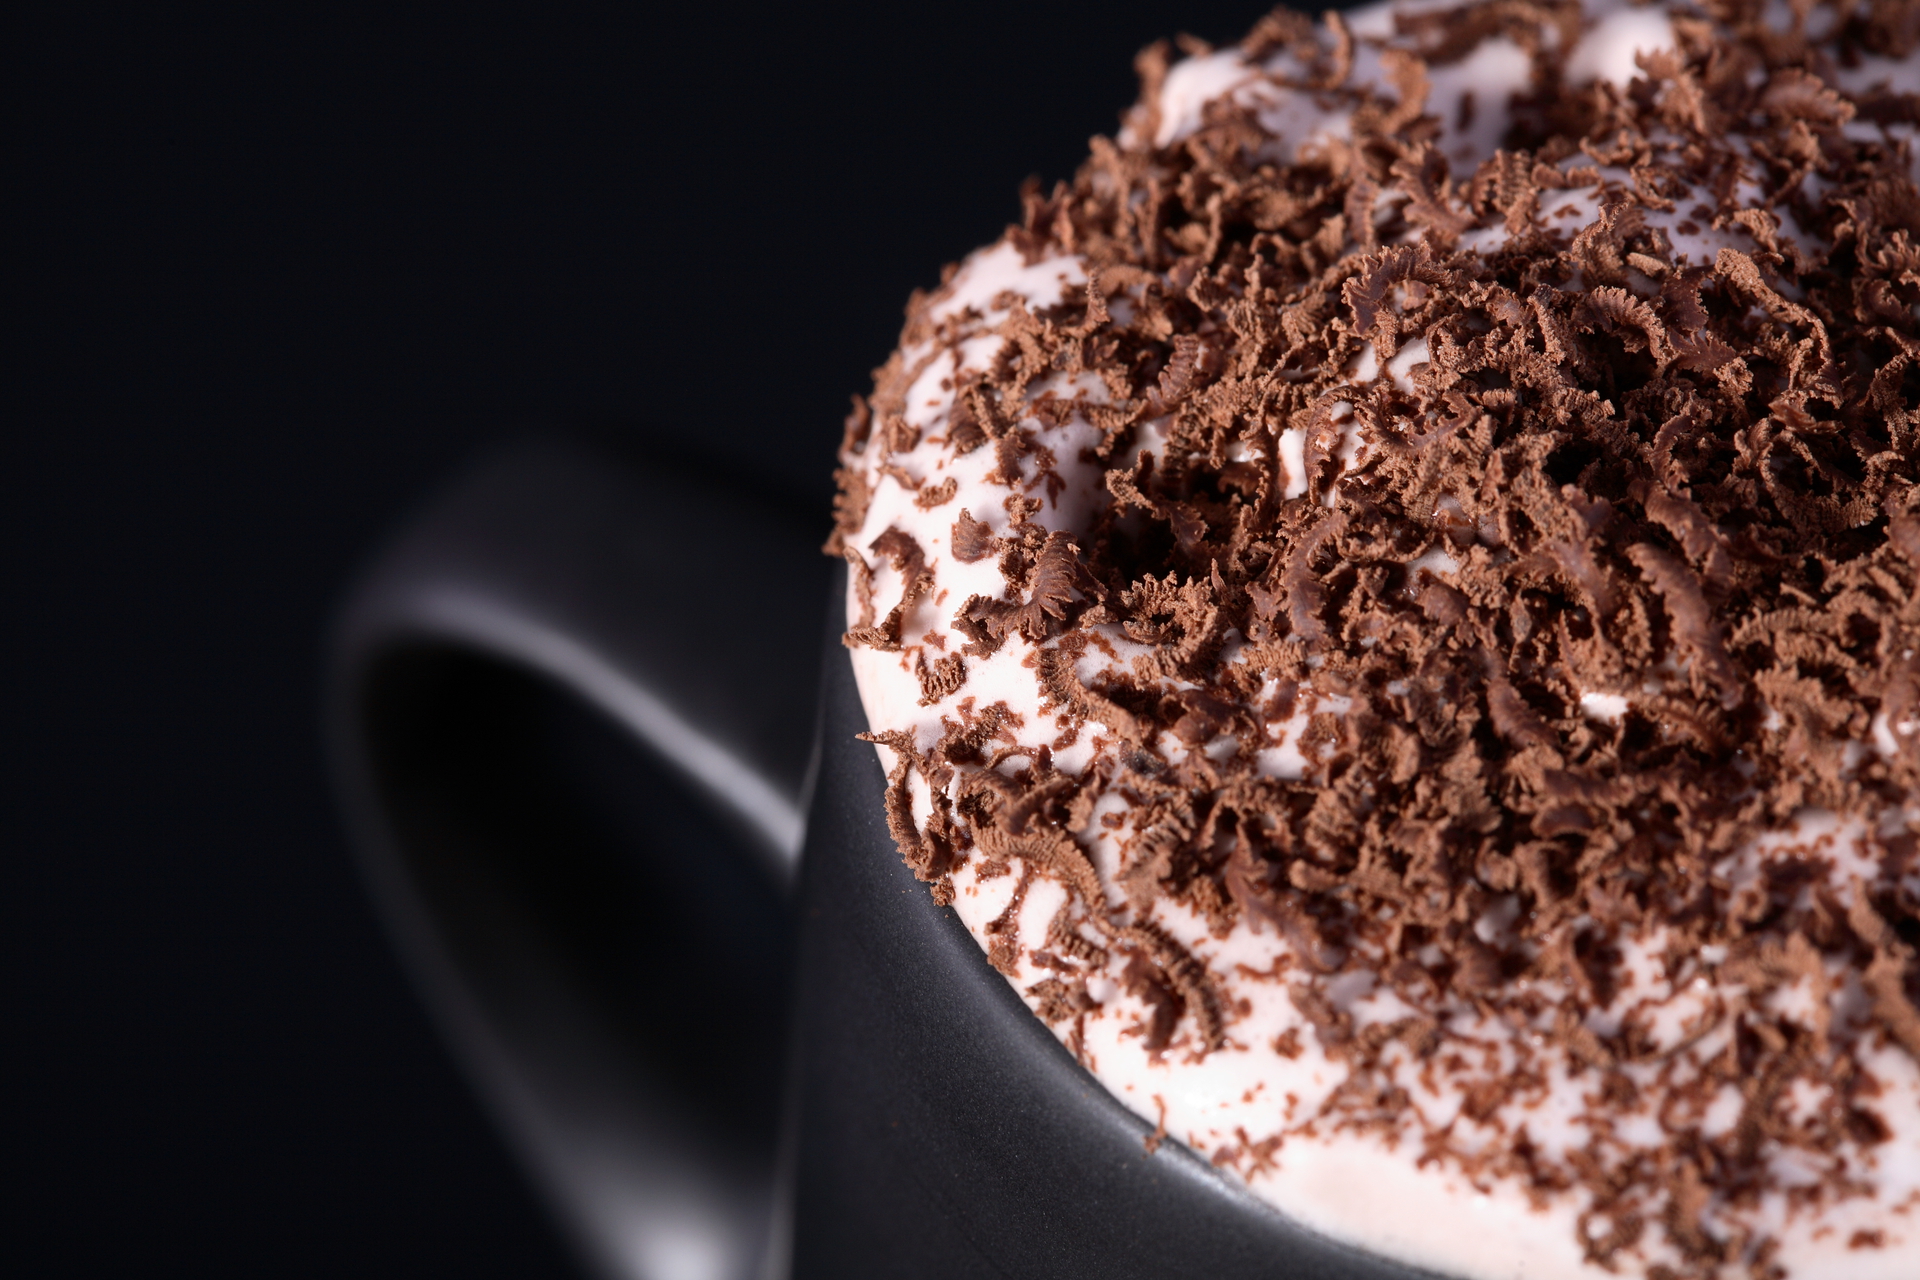 A close-up view of a beautiful cappuccino with foamy milk and dark brew in a white ceramic mug.